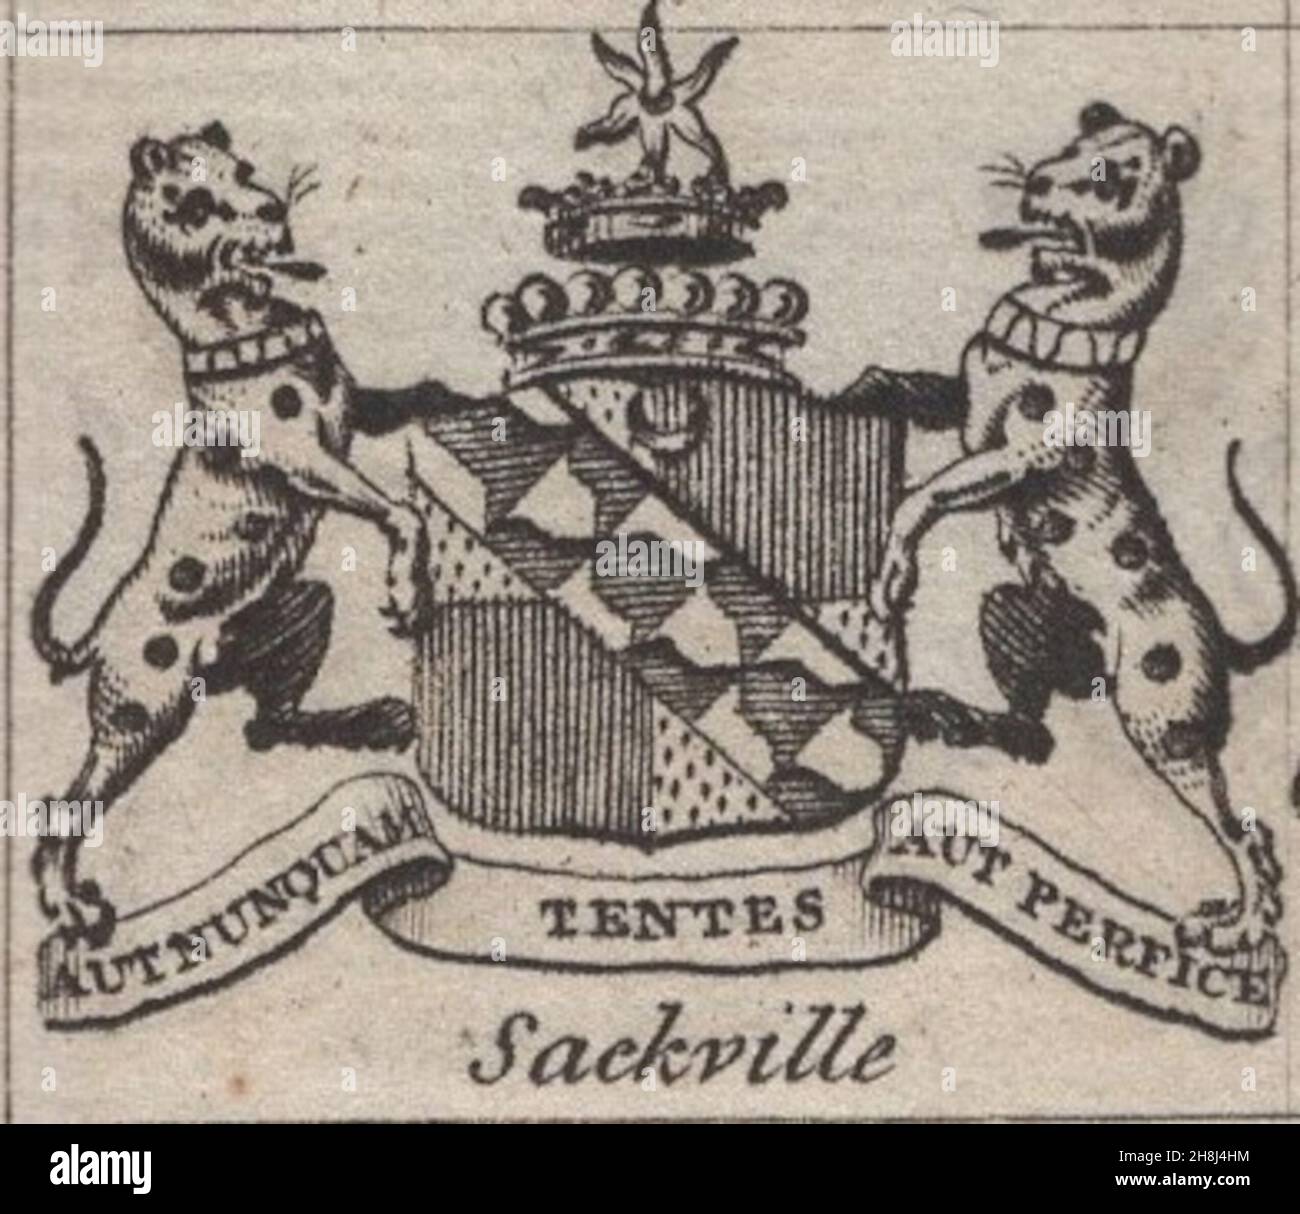 antique 18th century engraving heraldy coats of arms, English Viscounts , Motto / slogan: Aut Nunquam Tentes Aut Perfice. Sackville. by Woodman & Mutlow fc russel co circa 1780s Source: original engravings from  the annual almanach book. Stock Photo